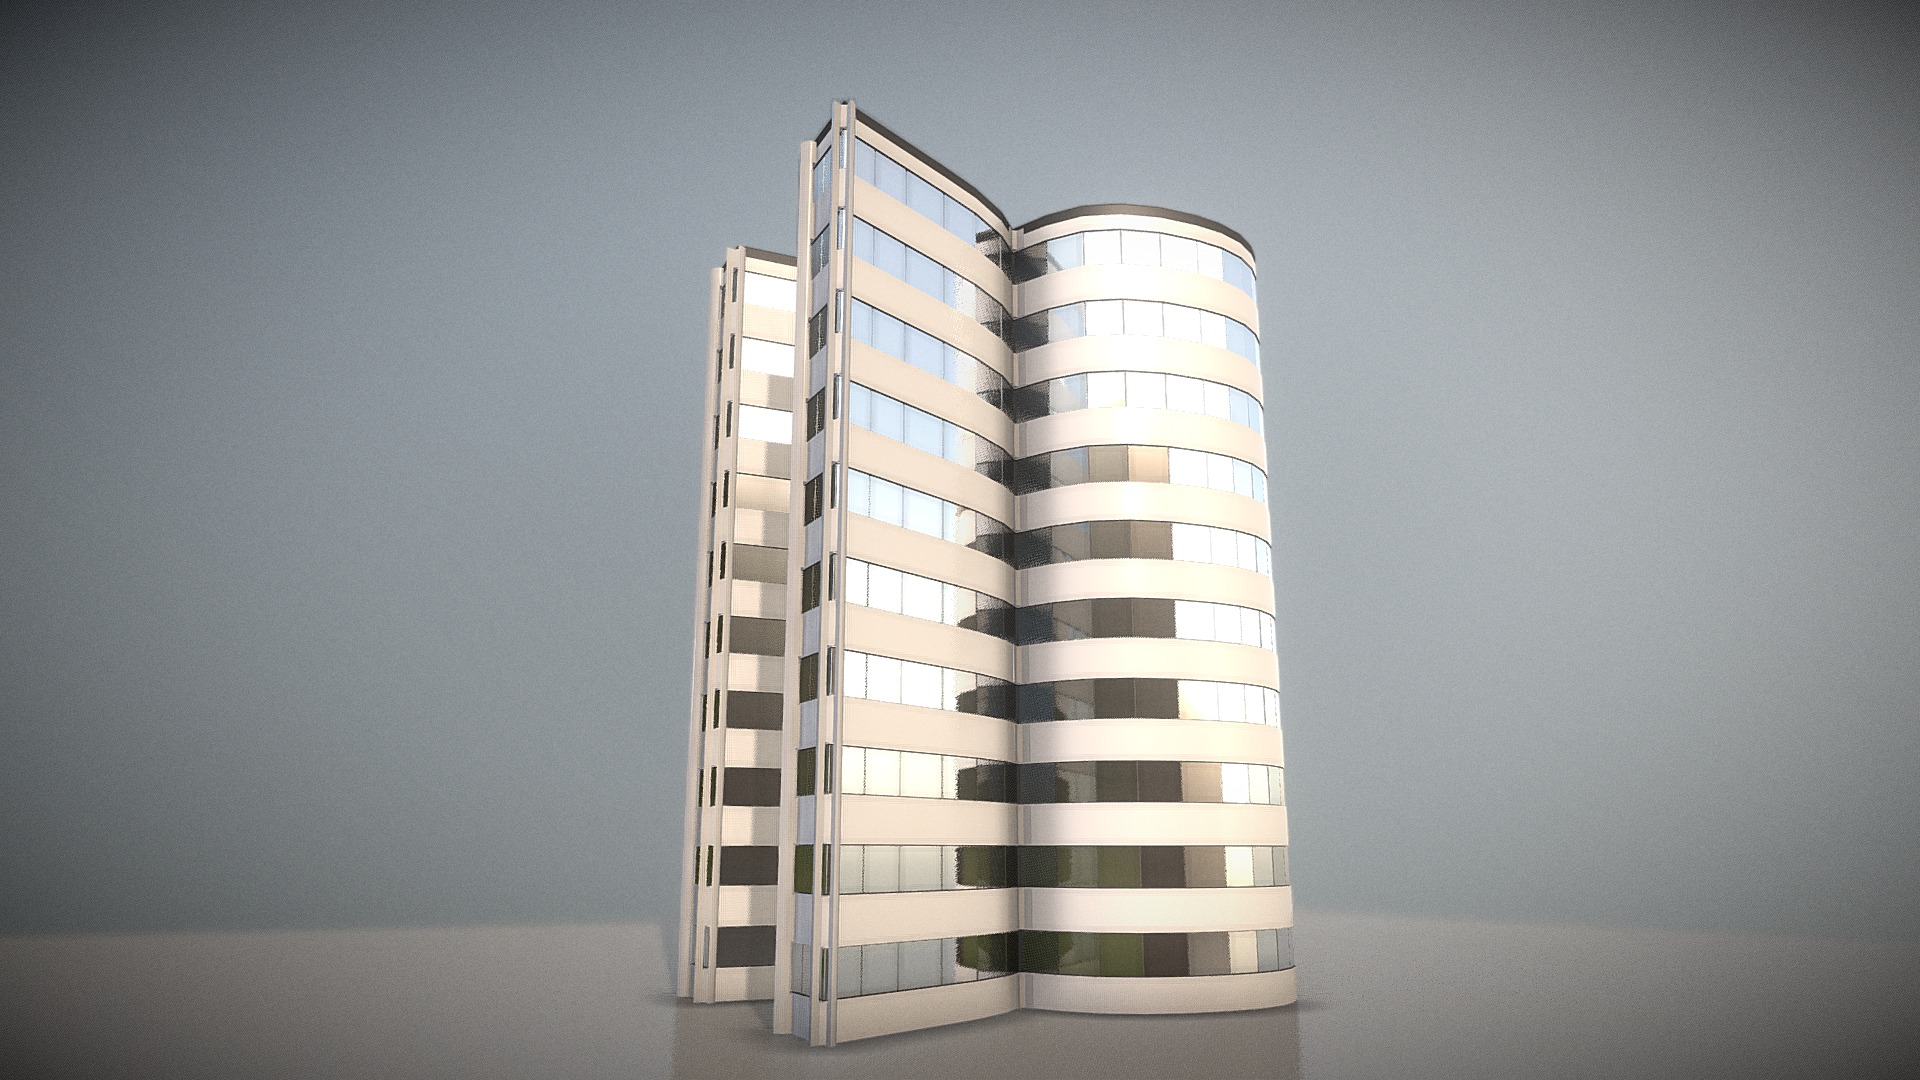 3D model City Building Design R-1 - This is a 3D model of the City Building Design R-1. The 3D model is about a tall building with a glass front.